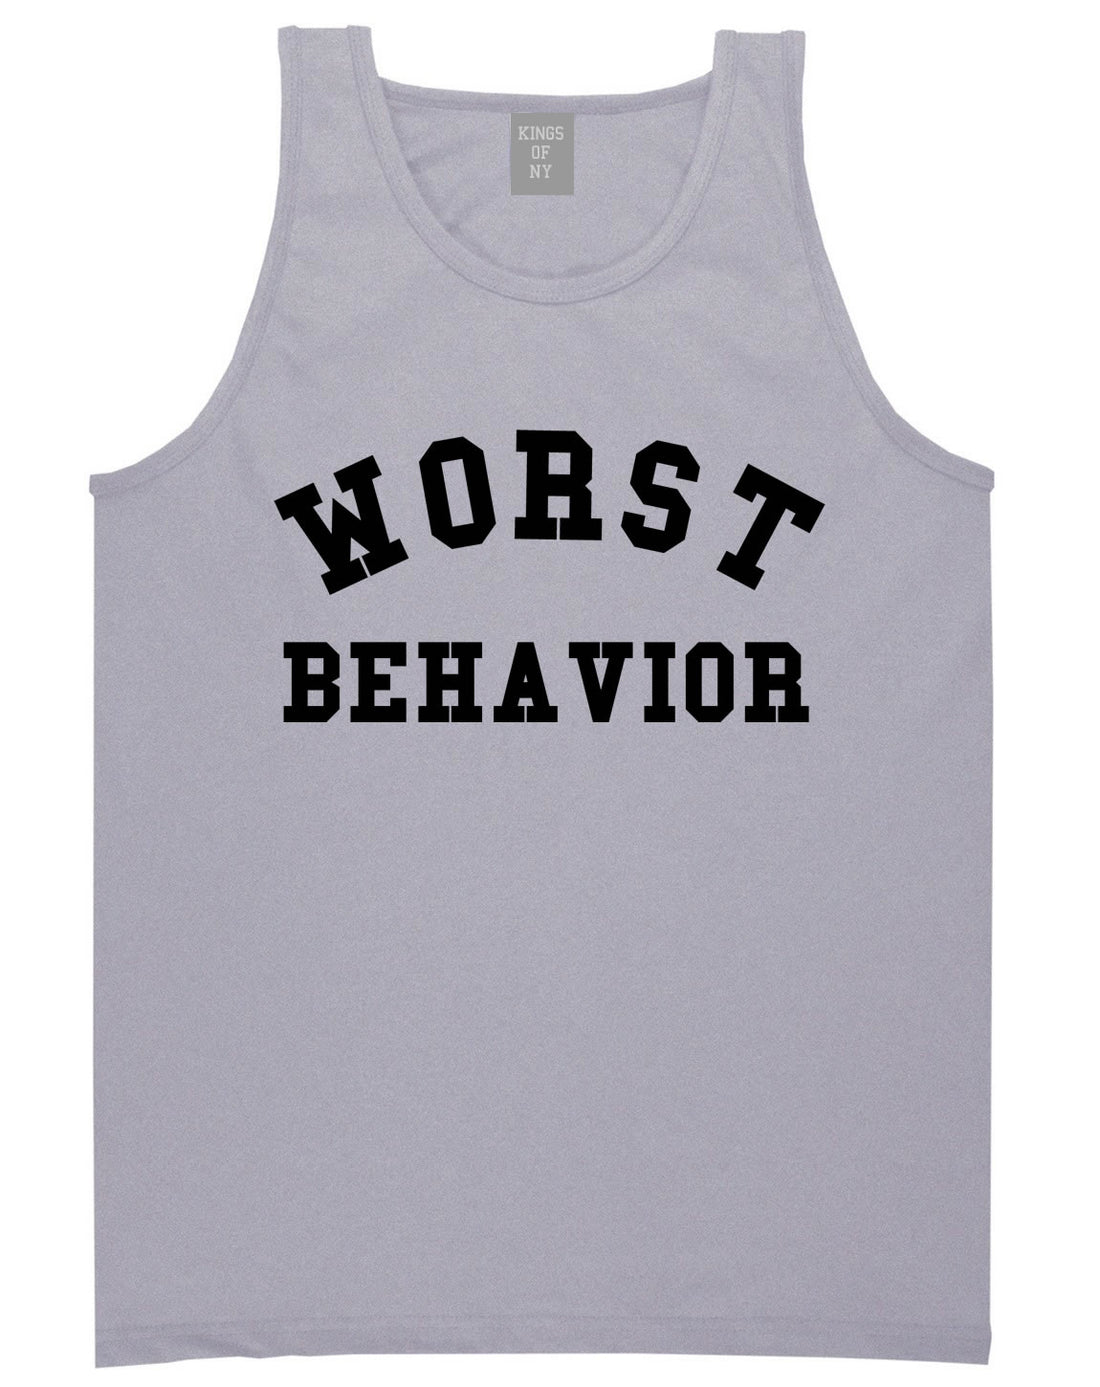 Worst Behavior Tank Top in Grey by Kings Of NY